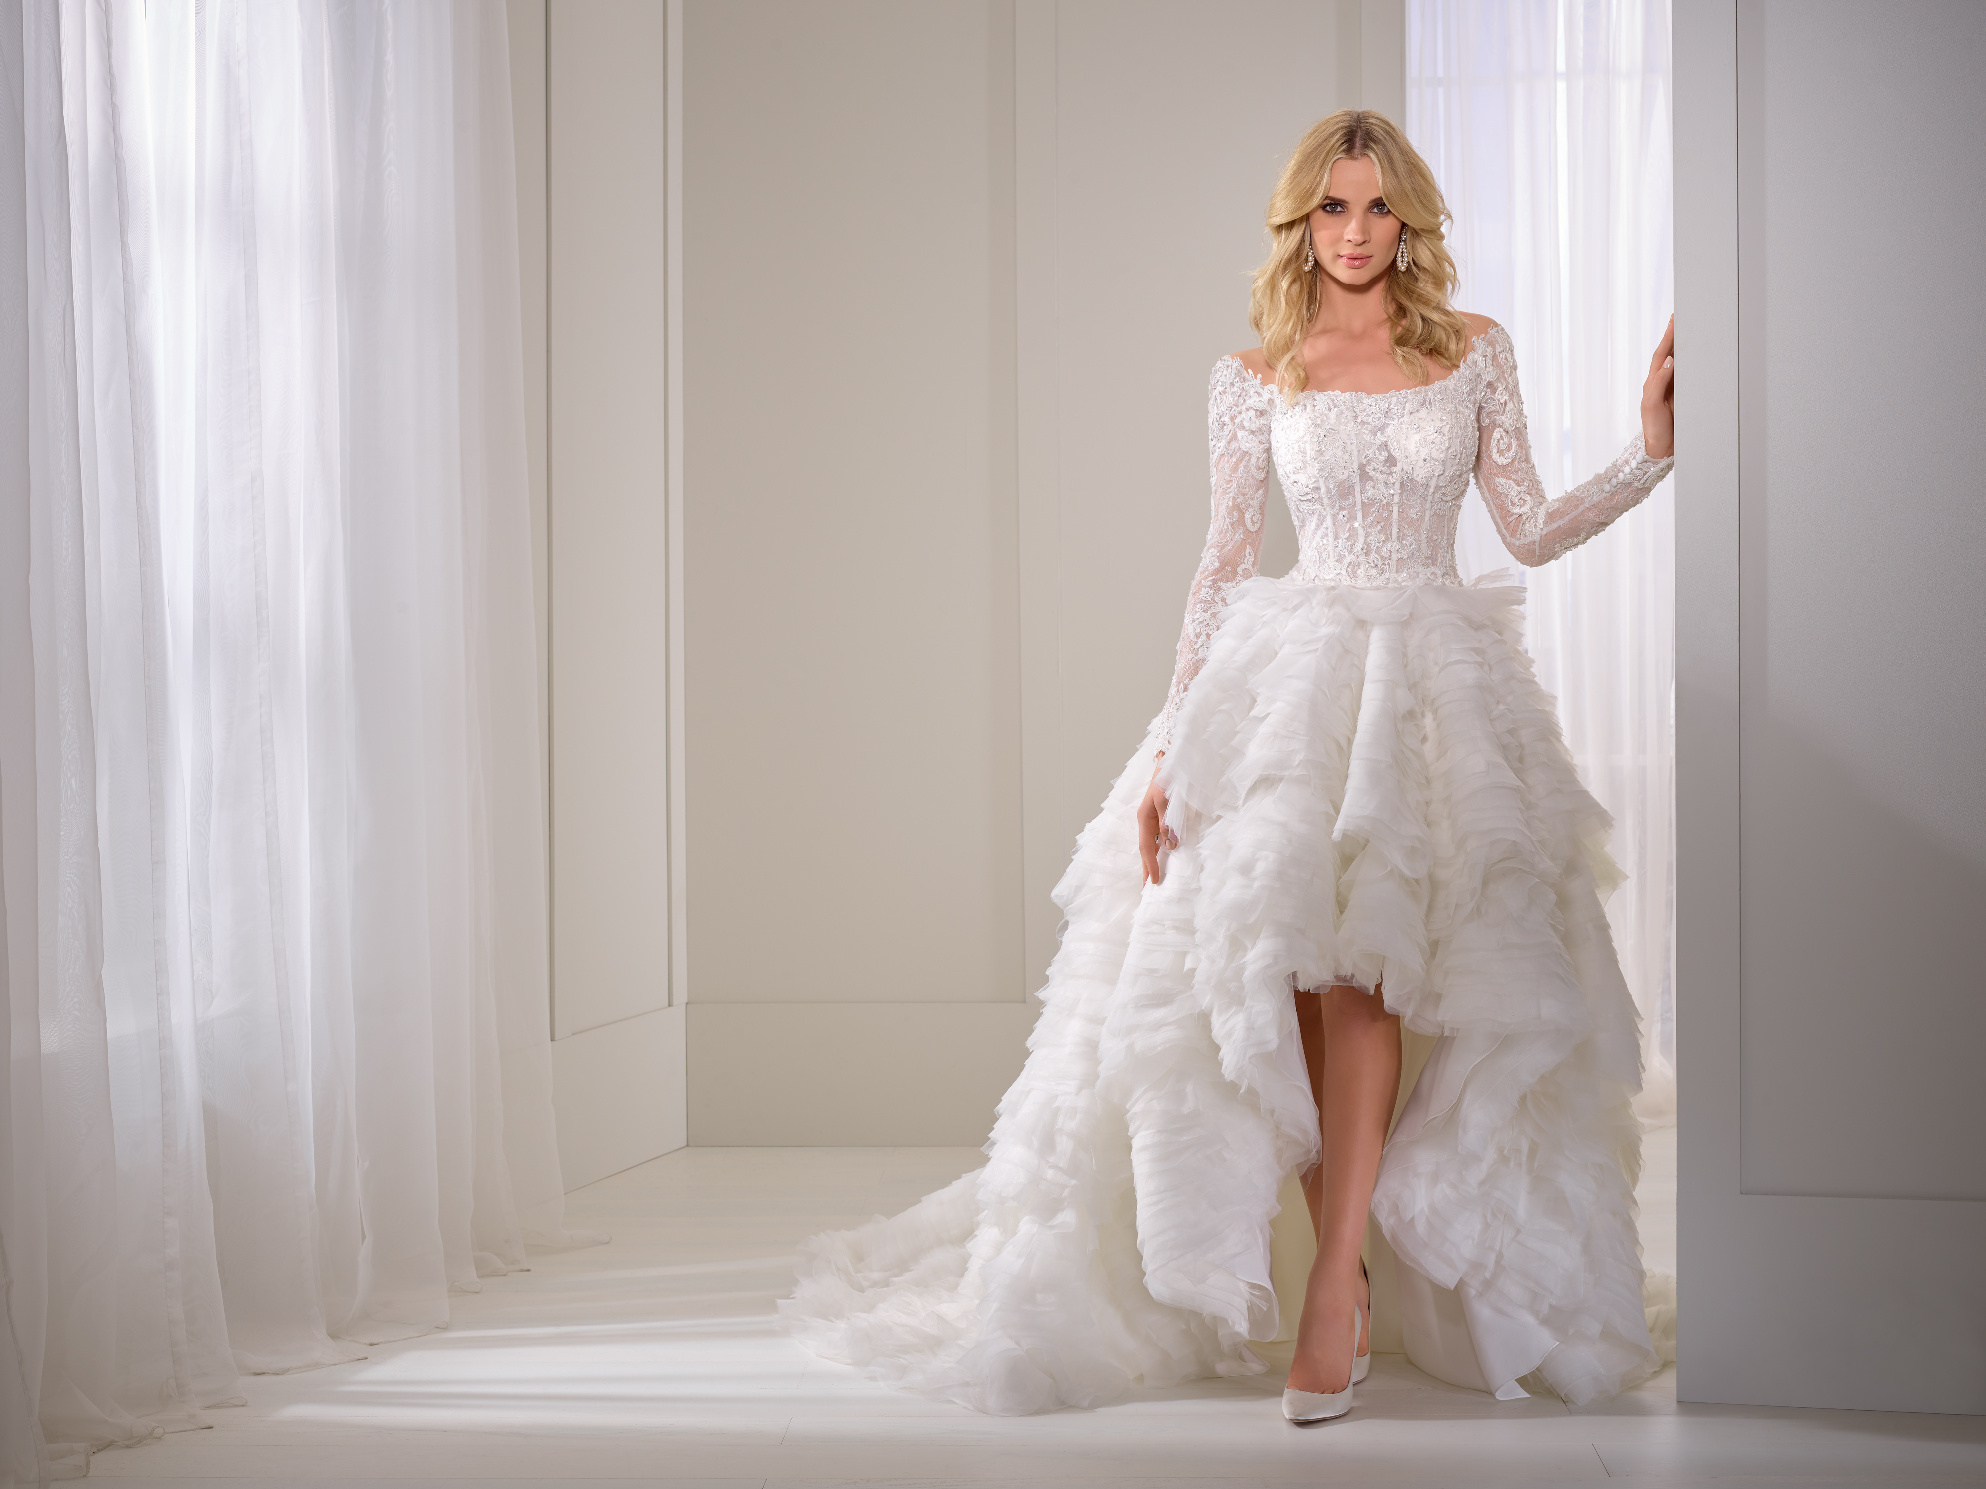 Photo of a model in Ronald Joyce 69375, a hi lo wedding dress silhouette with a lace illusion bodice and matching long sleeves complete with an organza and tulle ruffled skirt